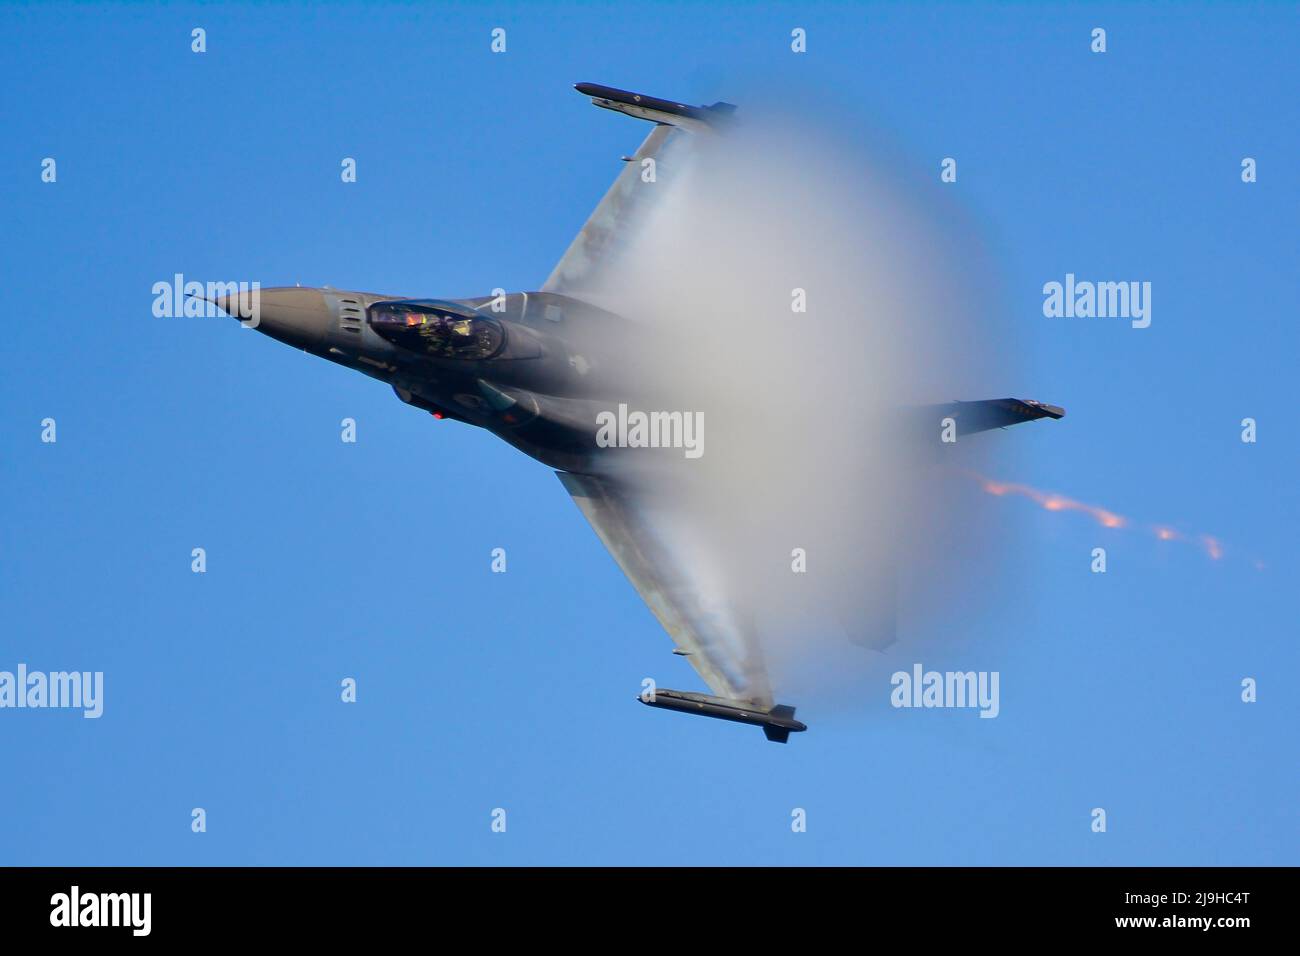 Thessaloniki, Greece - October 28, 2021: F-16 warplane flying during the military parade to celebrate the liberation of Thessaloniki Stock Photo